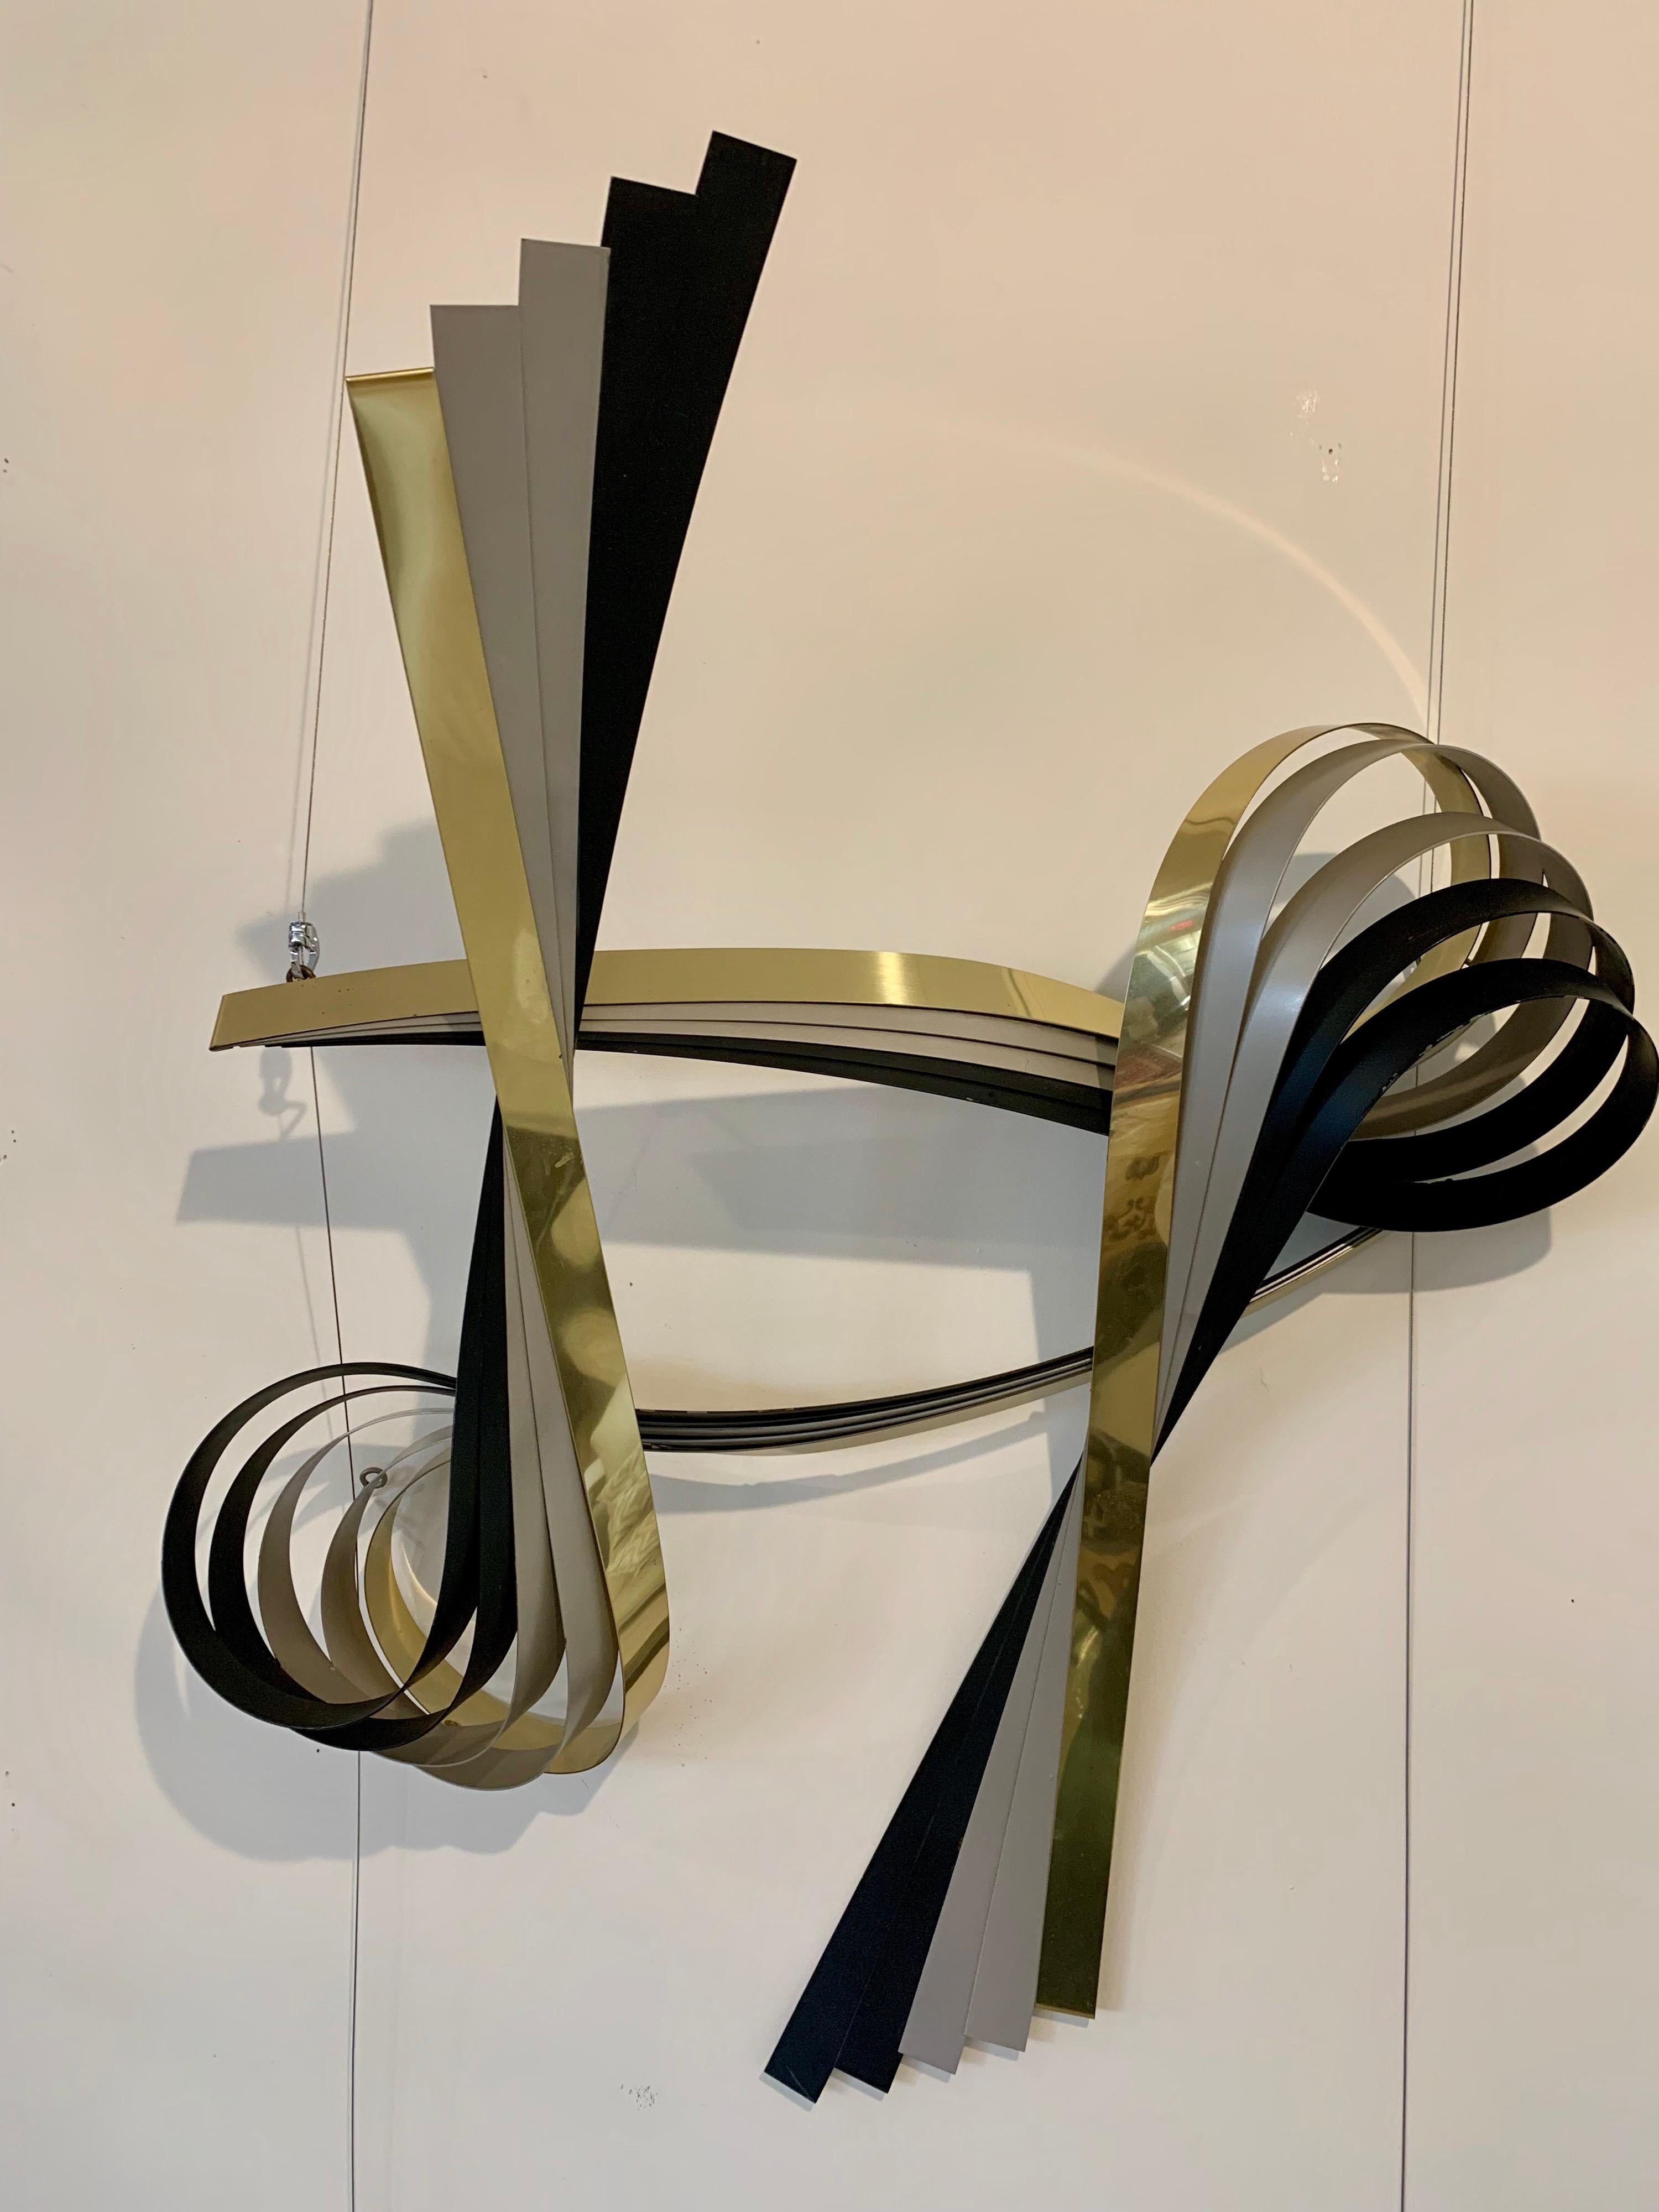 Stunning 1980s hanging wall sculpture by Curtis Jere depicting a large flowing ribbon in brass and black chrome. Ready to hang and can be hung either vertically or horizontally.